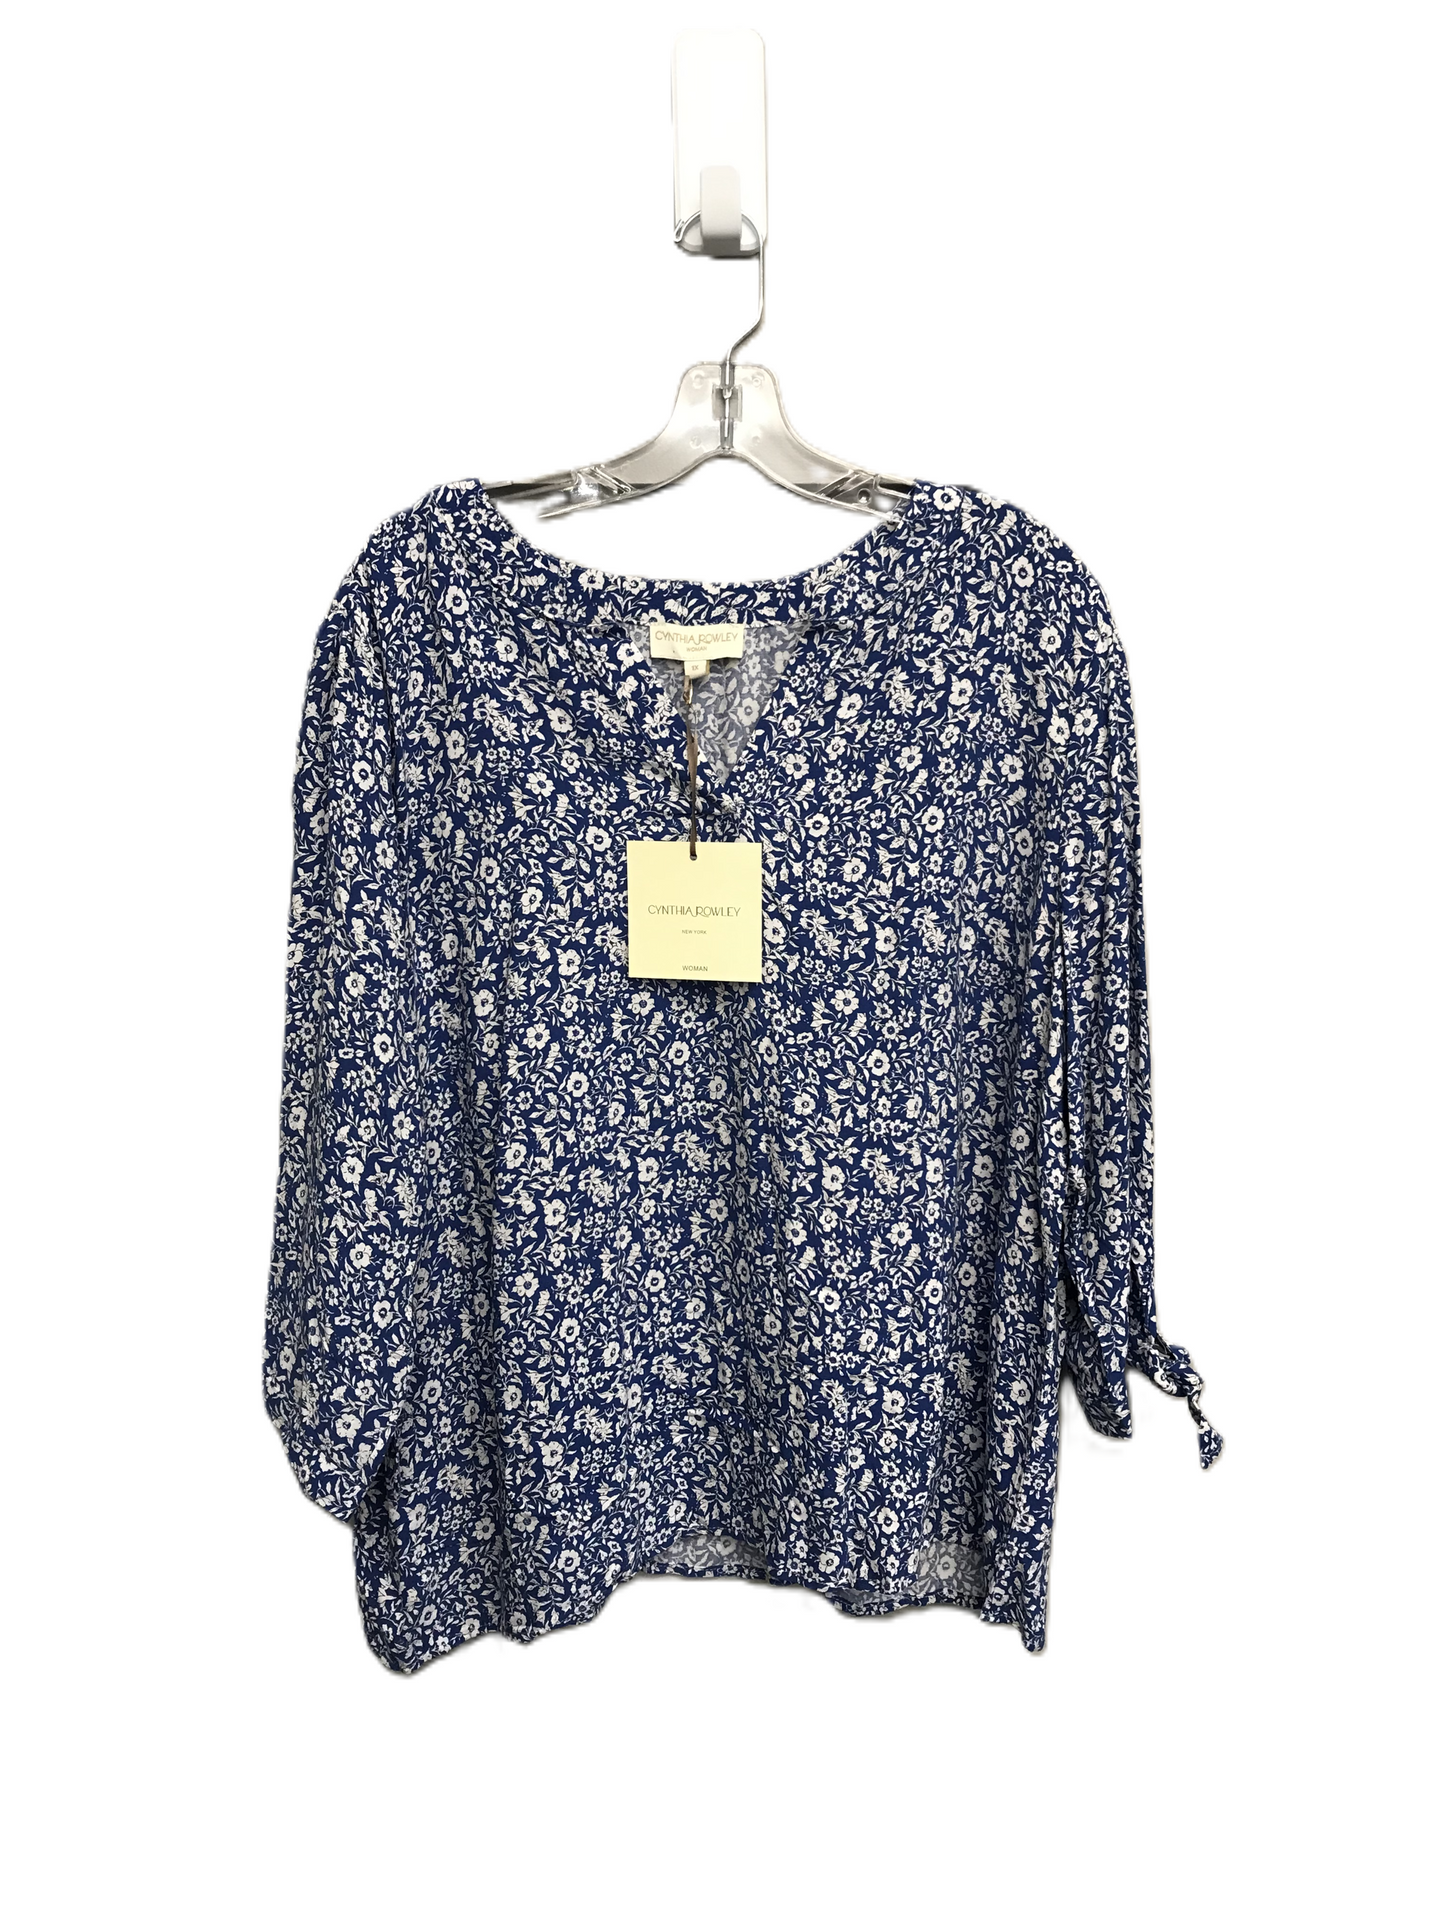 Floral Print Top Long Sleeve By Cynthia Rowley, Size: 1x